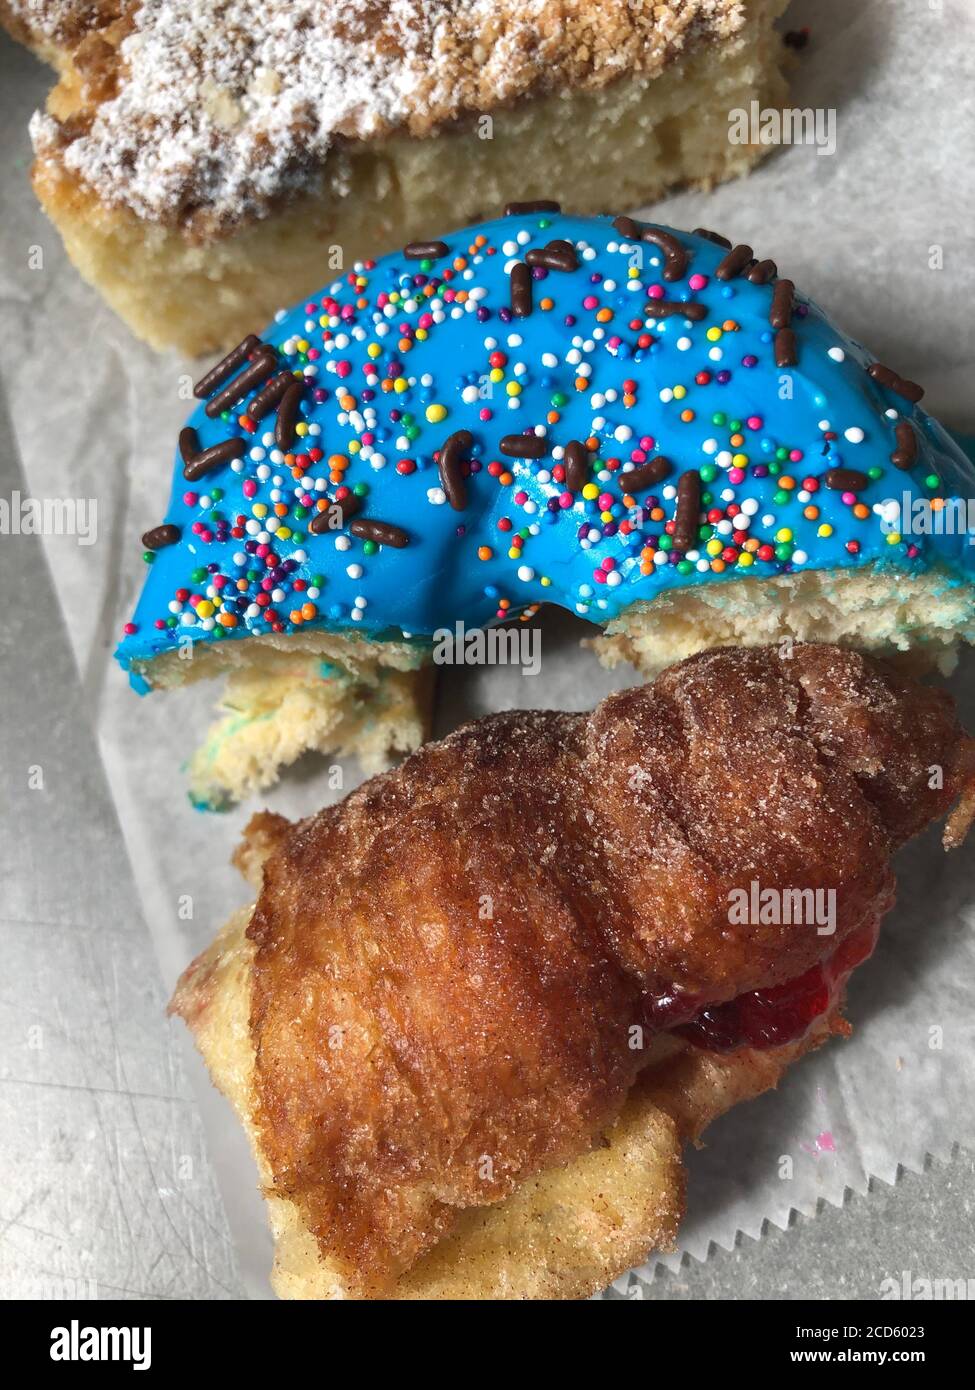 Sugary blue icing donut and cakes on table Stock Photo